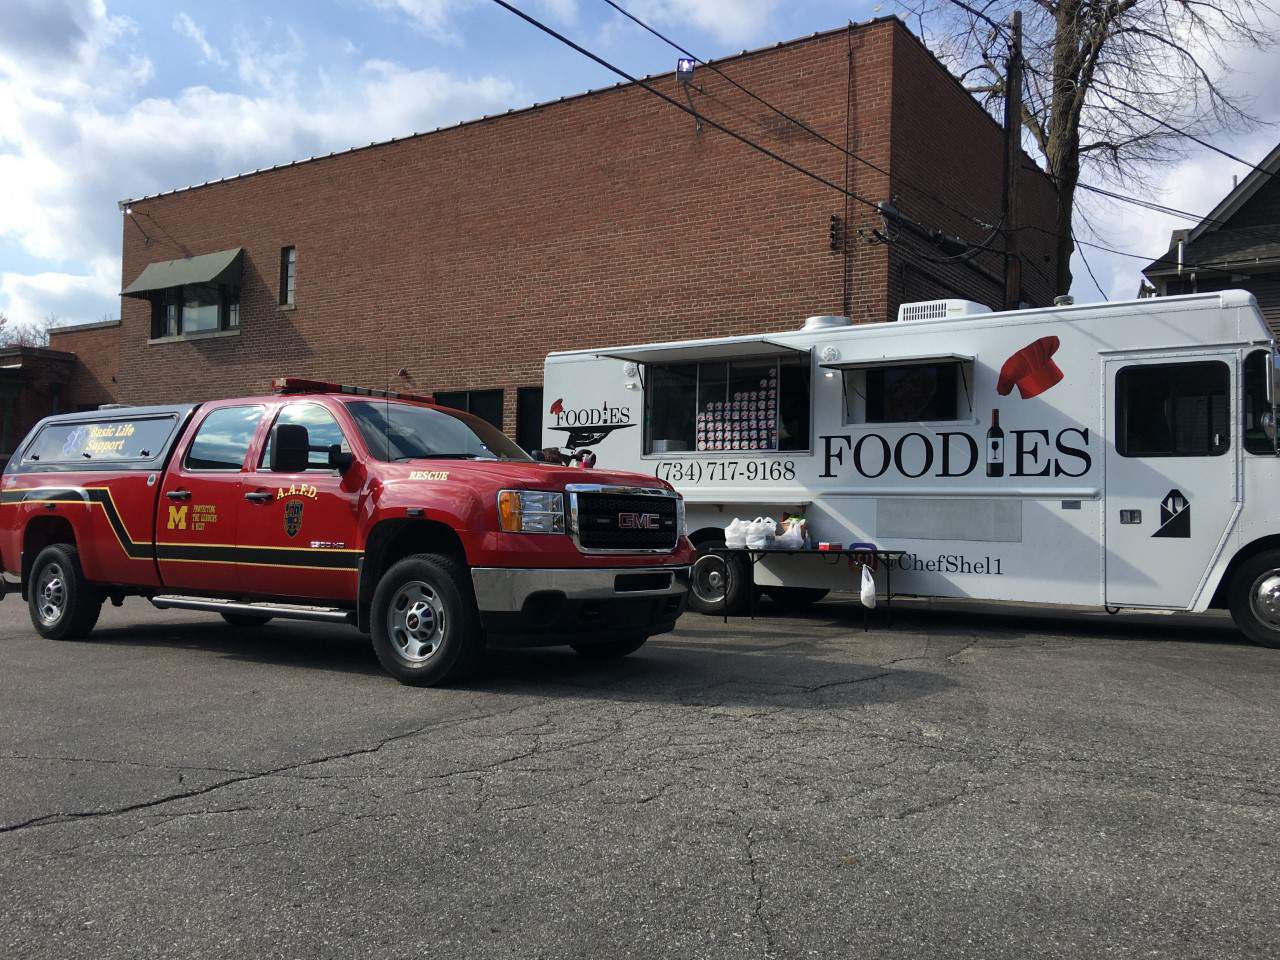 Ann Arbor catering company serves 8,000 meals to restaurant workers, first responders